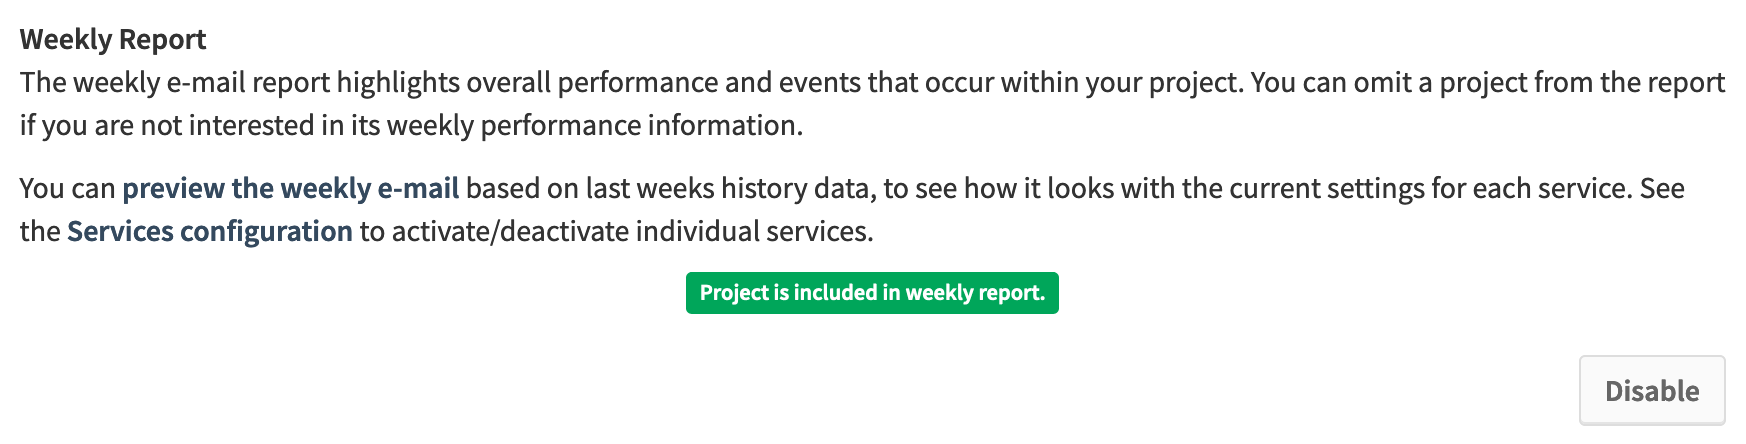 Configure weekly reports for projects